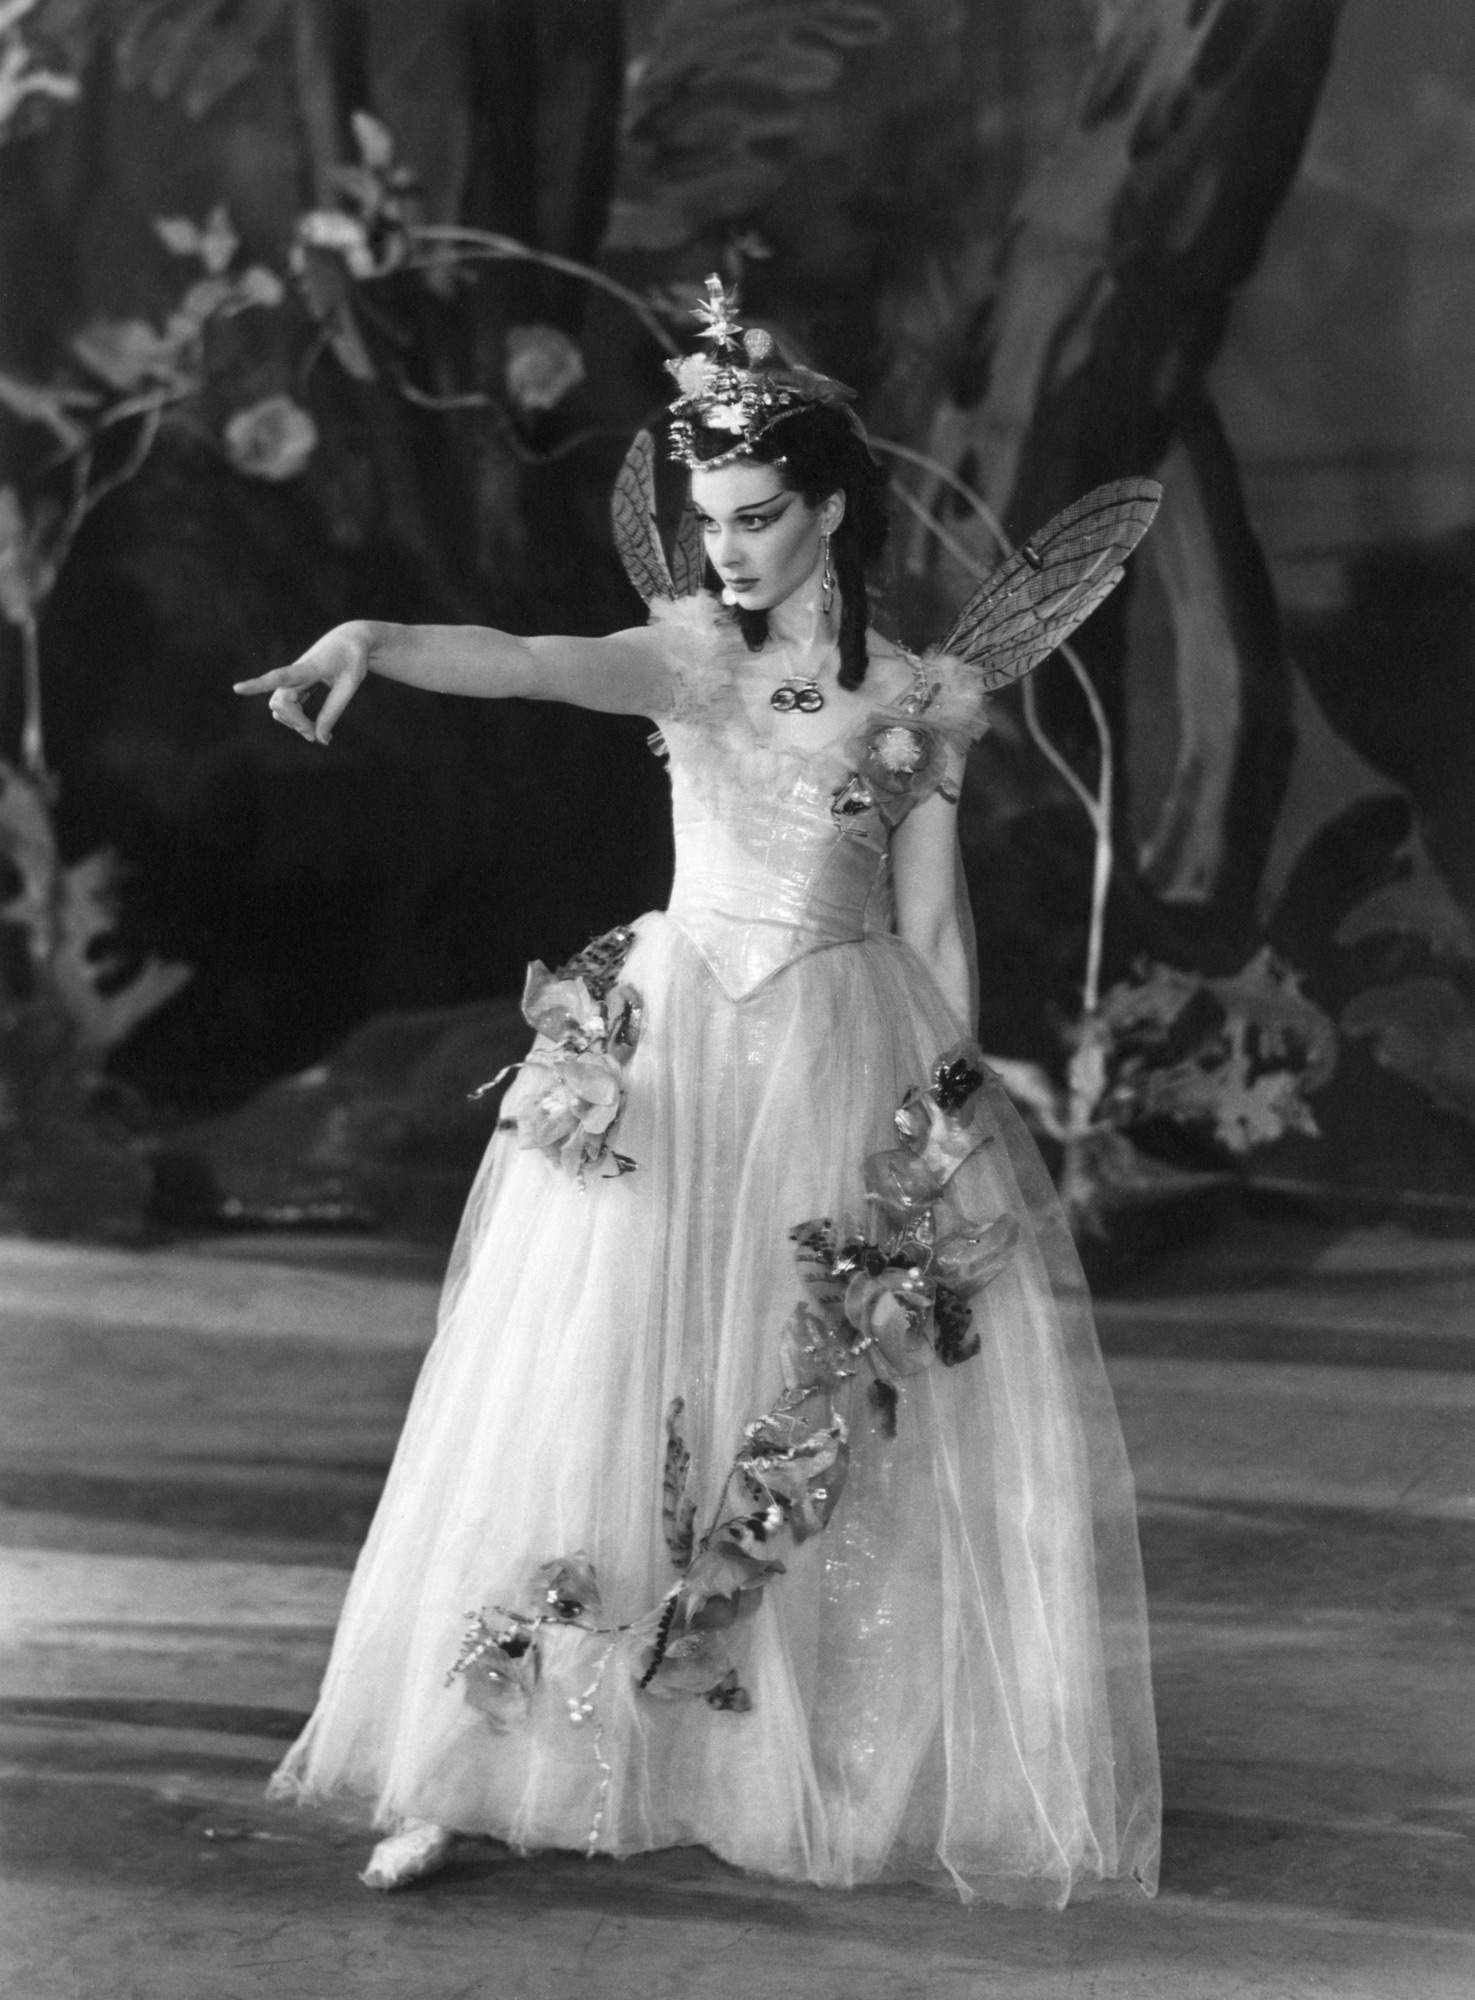  Leigh as Titania from A Midsummer Night's Dream, 1937